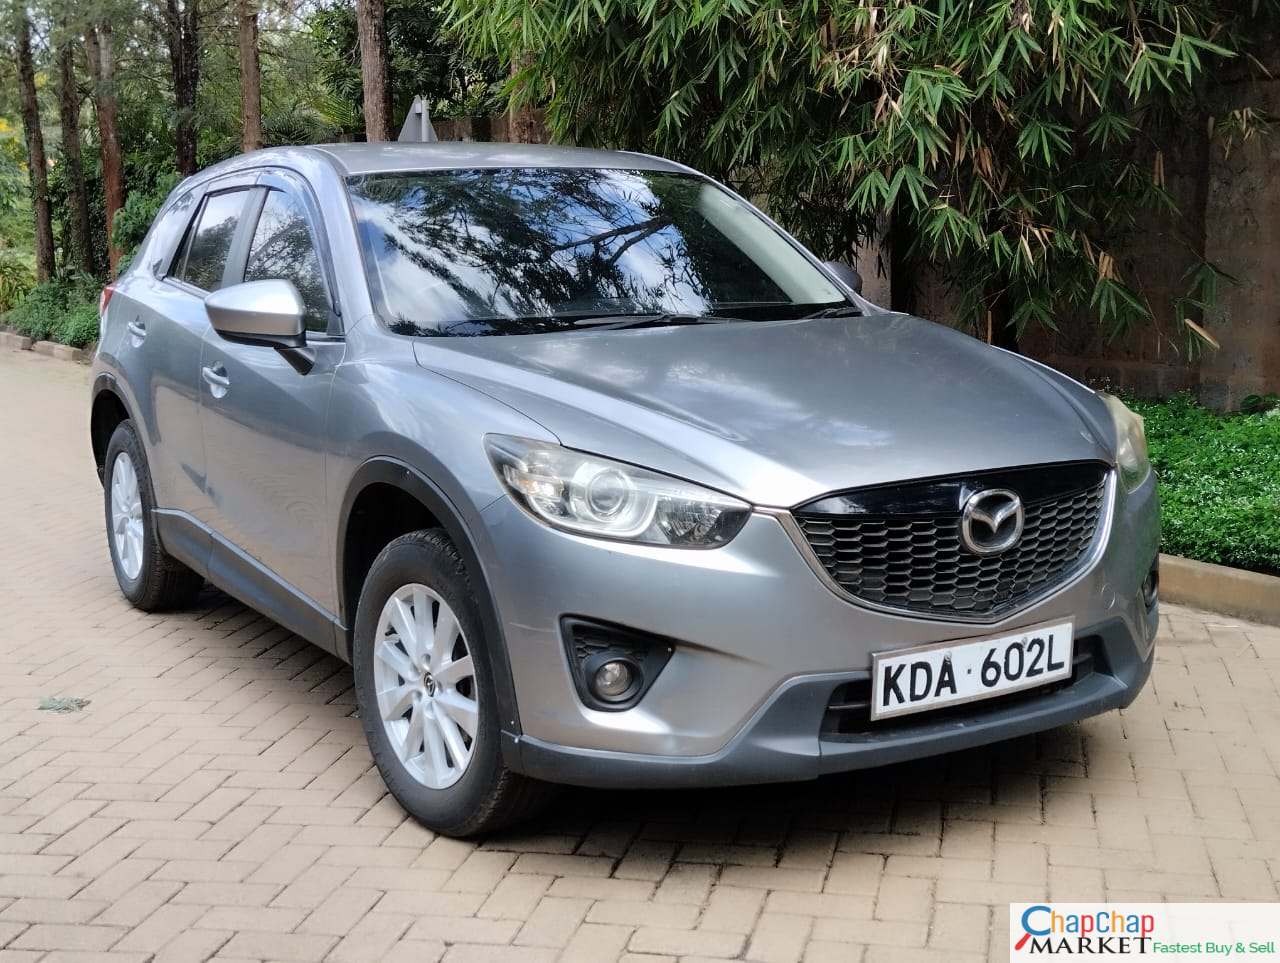 Cars Cars For Sale/Vehicles-Mazda CX-5 Quick sale You Pay 30% DEPOSIT TRADE IN OK installments exclusive 1